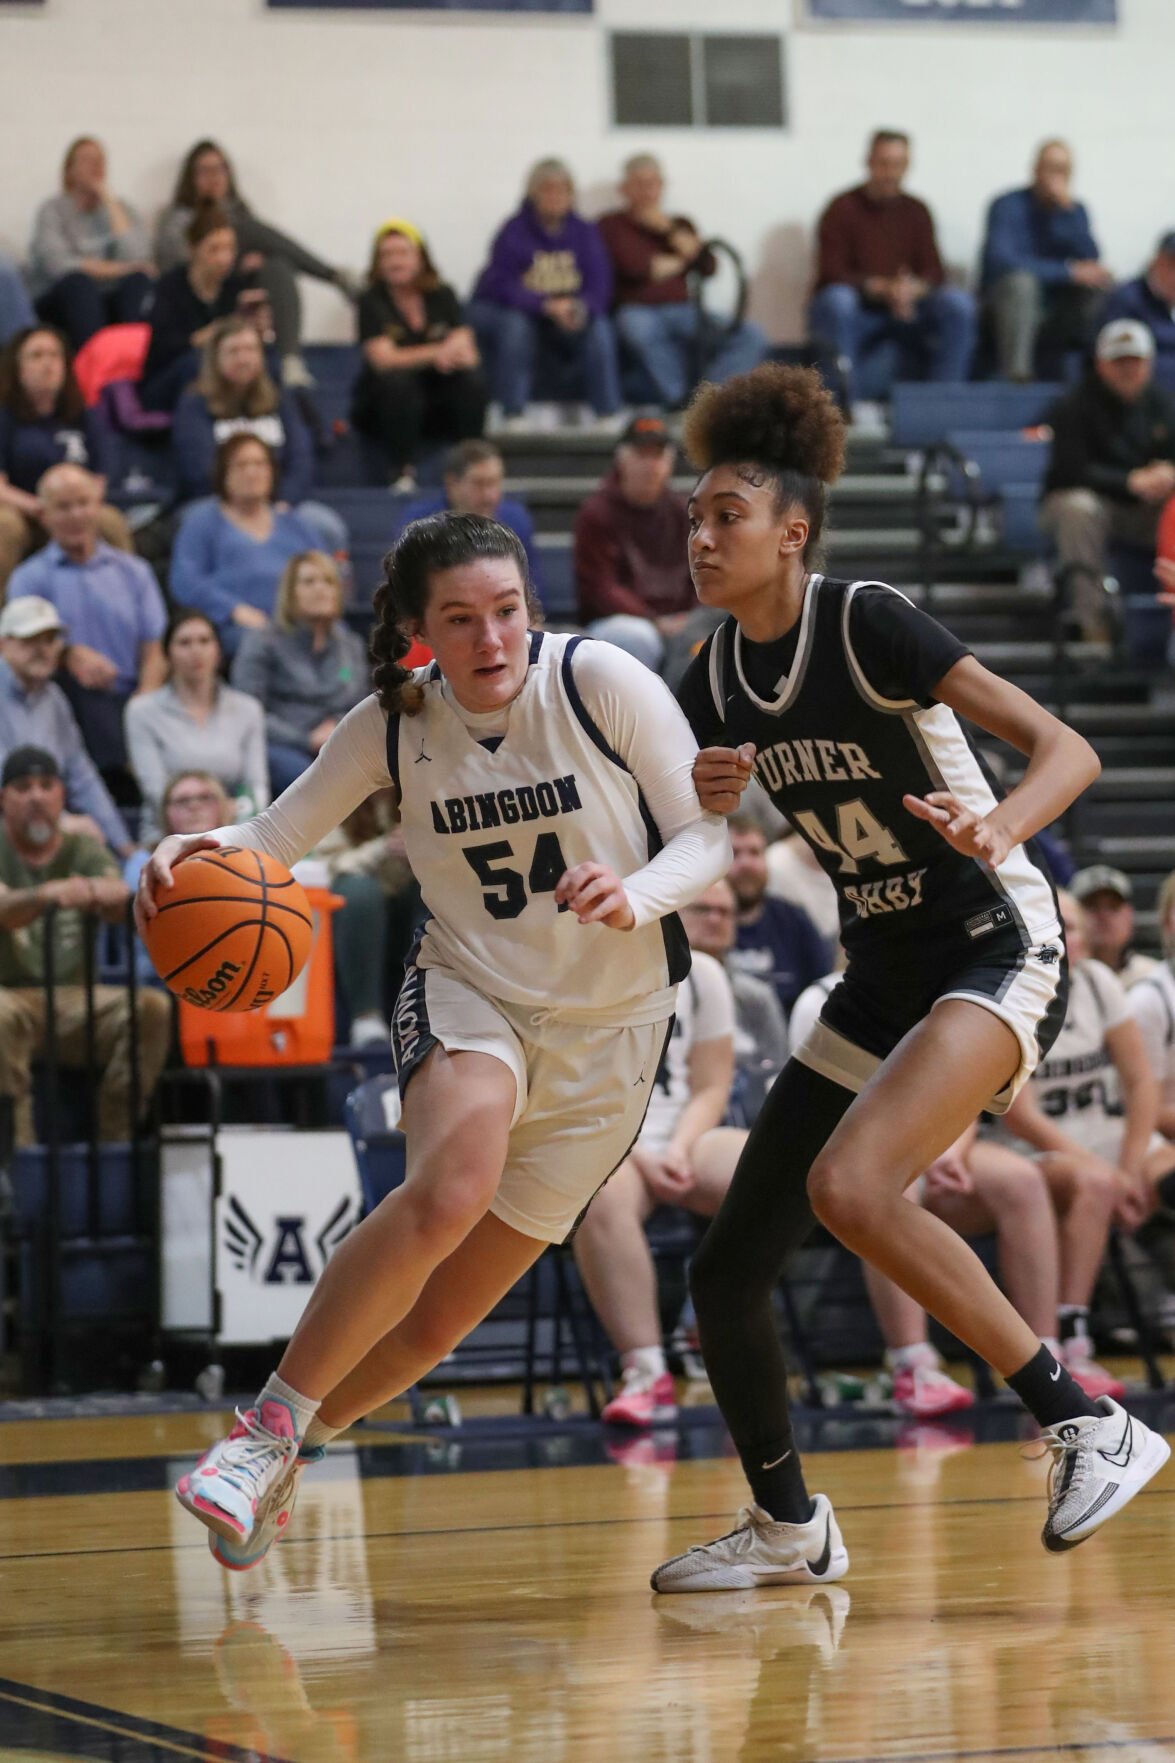 Abingdon’s Trivette Leads Falcons to Thrilling OT Victory in Quarterfinals